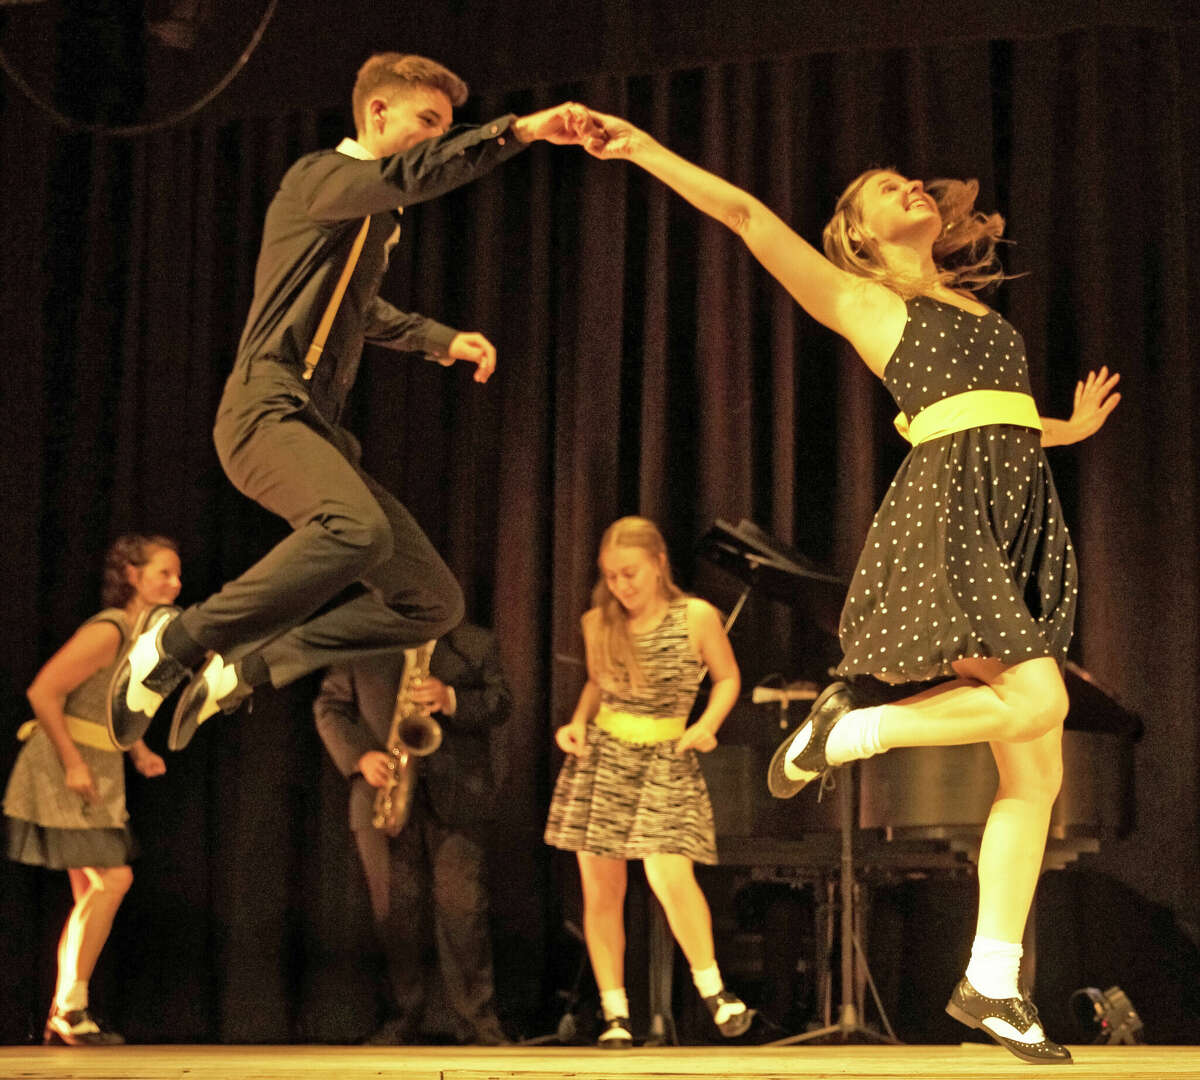 “In Due Time,” which will be at the Wildey Theatre for two performances on Feb. 12, combines tap dancing with the jazz music of the Dave Brubeck Quartet.